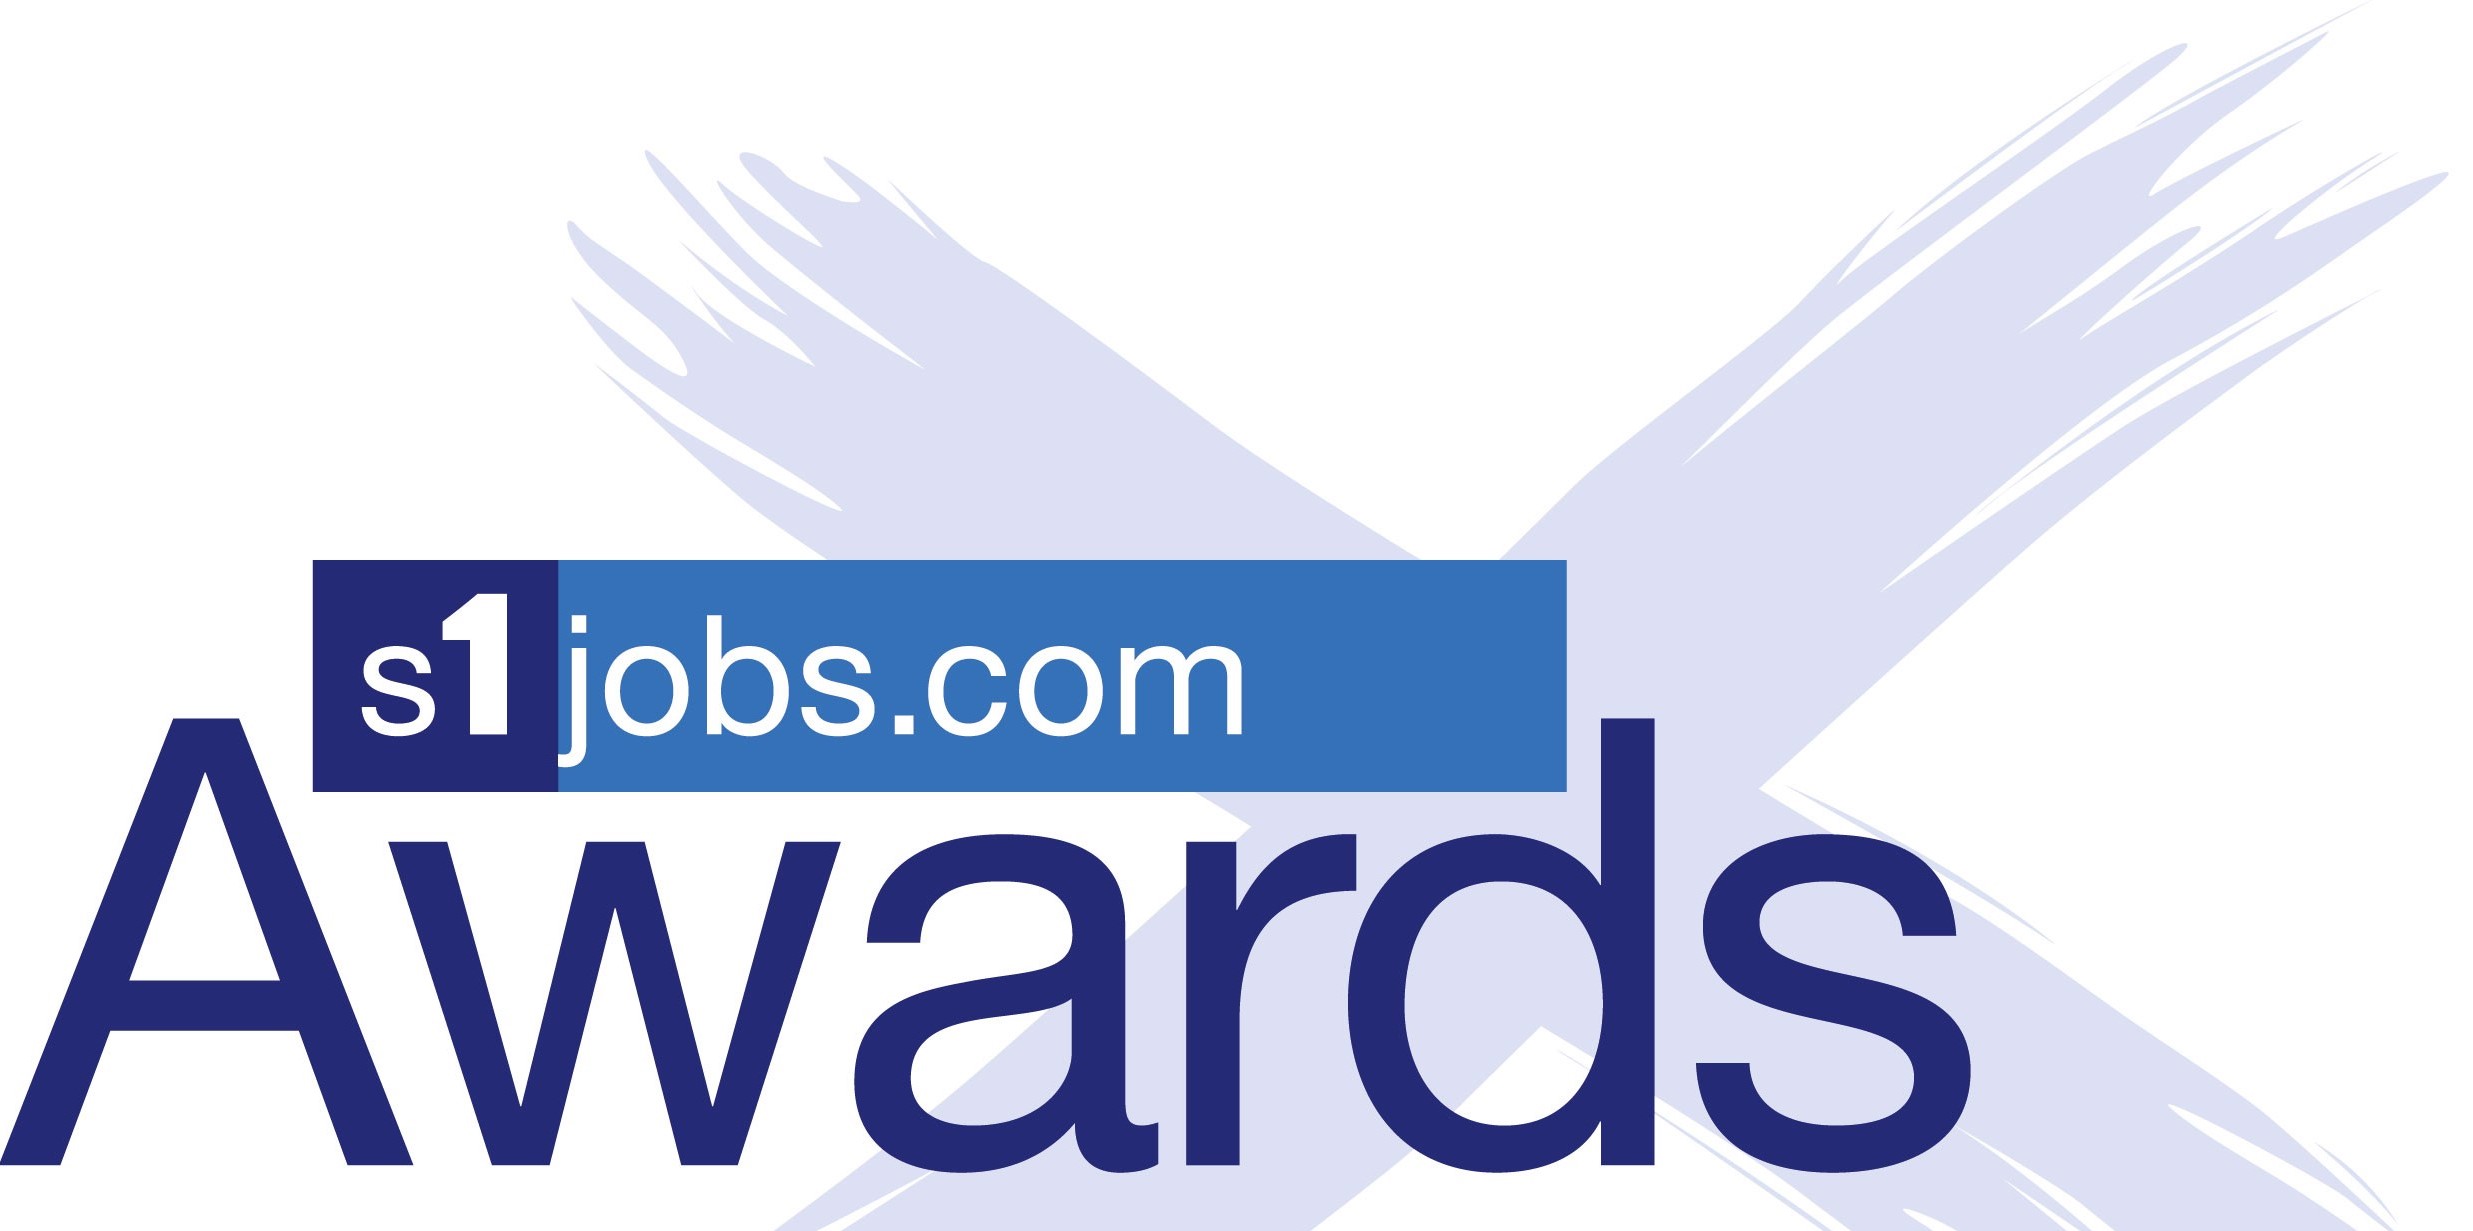 Stanton House is a finalist in the s1job.com awards!